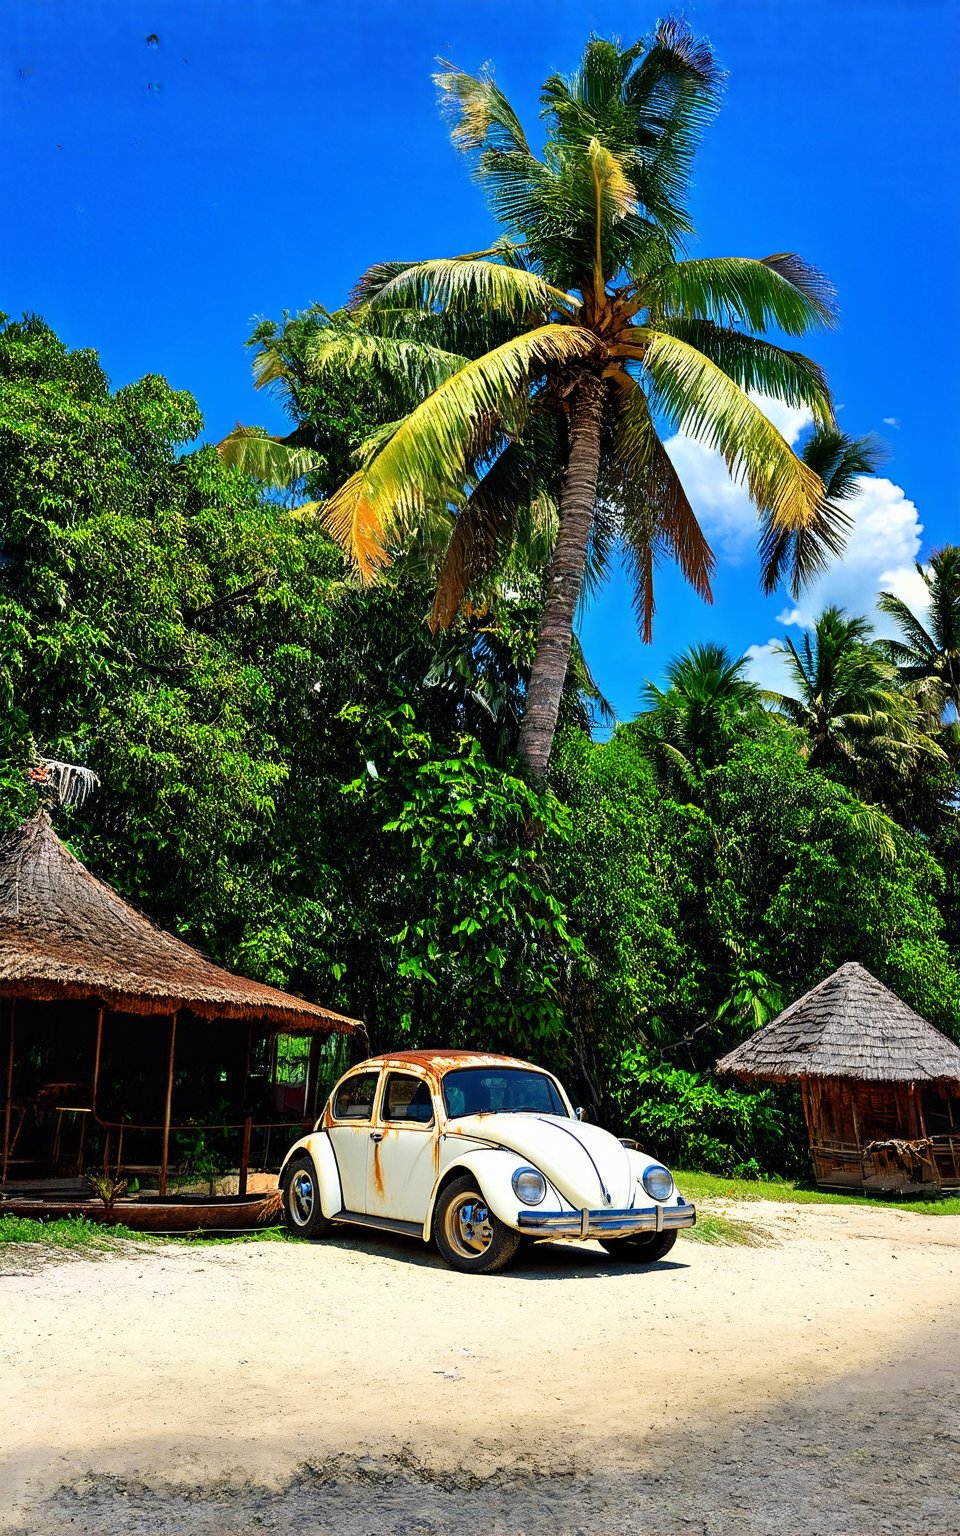 (best quality, 4K, 8K, high-resolution, masterpiece), ultra-detailed, Stunning visuals of a photorealistic image: A rusty and broken white Volkswagen Beetle sits beside an east Malay traditional wooden house, surrounded by the tranquility of a beach and fishing village. The composition is dynamic, with the beetle's curves contrasting the angular lines of the house. A park boat drifts gently in the distance, while coconut trees sway above. A rhu tree stands tall, its branches tangled in a net. The blue sky above provides a cool color palette, as the camera captures both a close-up shot of the beetle and a wide view of the serene scene.
